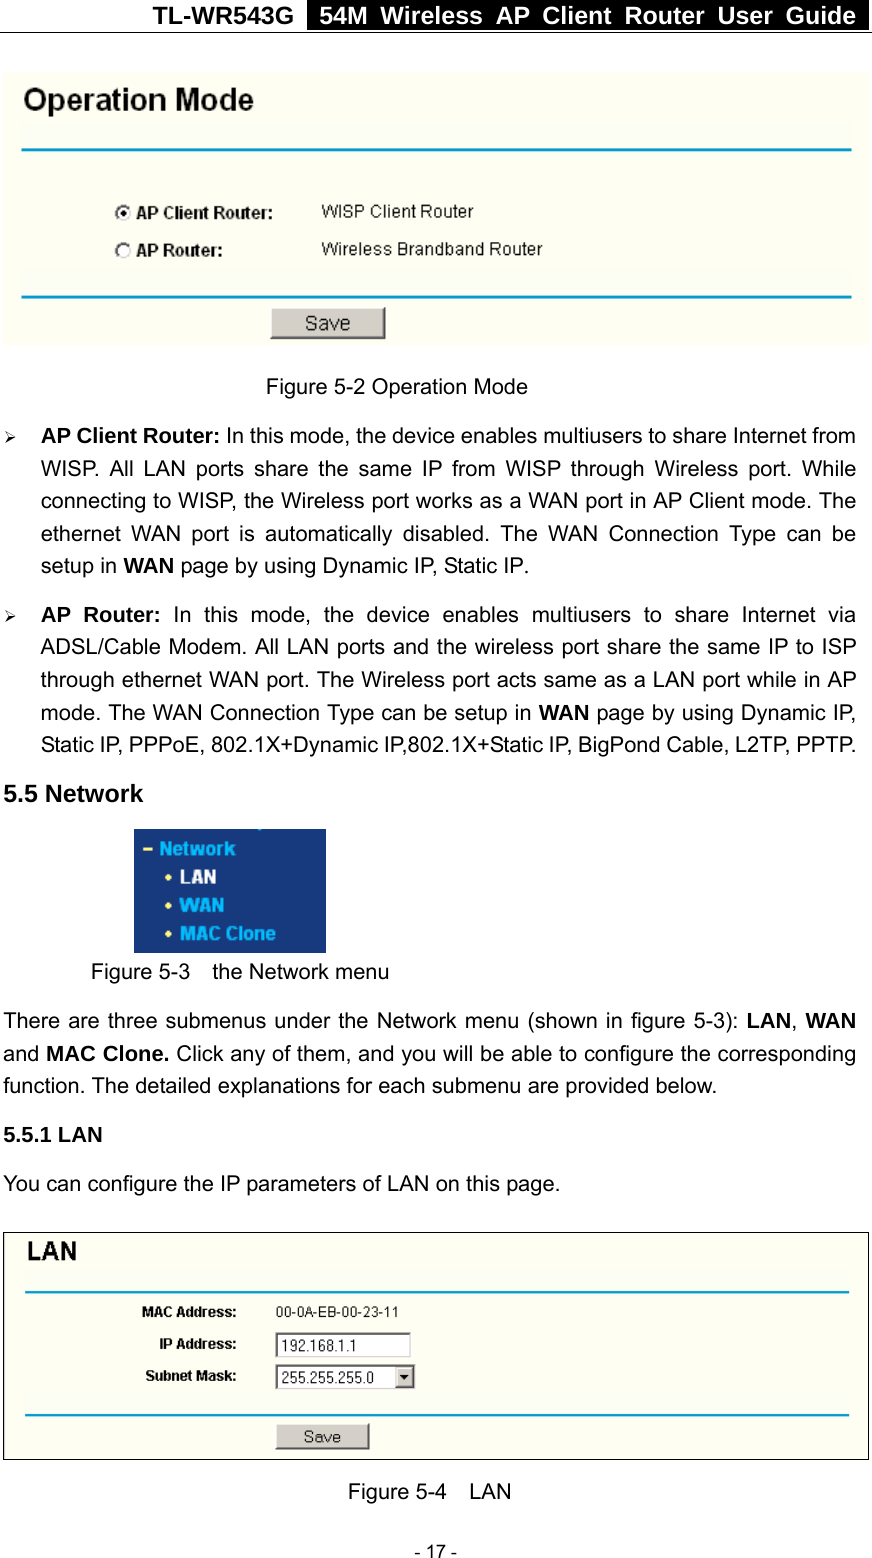 TL-WR543G   54M Wireless AP Client Router User Guide                           Figure 5-2 Operation Mode ¾ AP Client Router: In this mode, the device enables multiusers to share Internet from WISP. All LAN ports share the same IP from WISP through Wireless port. While connecting to WISP, the Wireless port works as a WAN port in AP Client mode. The ethernet WAN port is automatically disabled. The WAN Connection Type can be setup in WAN page by using Dynamic IP, Static IP. ¾ AP Router: In this mode, the device enables multiusers to share Internet via ADSL/Cable Modem. All LAN ports and the wireless port share the same IP to ISP through ethernet WAN port. The Wireless port acts same as a LAN port while in AP mode. The WAN Connection Type can be setup in WAN page by using Dynamic IP, Static IP, PPPoE, 802.1X+Dynamic IP,802.1X+Static IP, BigPond Cable, L2TP, PPTP. 5.5 Network      Figure 5-3    the Network menu There are three submenus under the Network menu (shown in figure 5-3): LAN, WAN and MAC Clone. Click any of them, and you will be able to configure the corresponding function. The detailed explanations for each submenu are provided below. 5.5.1 LAN You can configure the IP parameters of LAN on this page.    Figure 5-4  LAN  - 17 - 